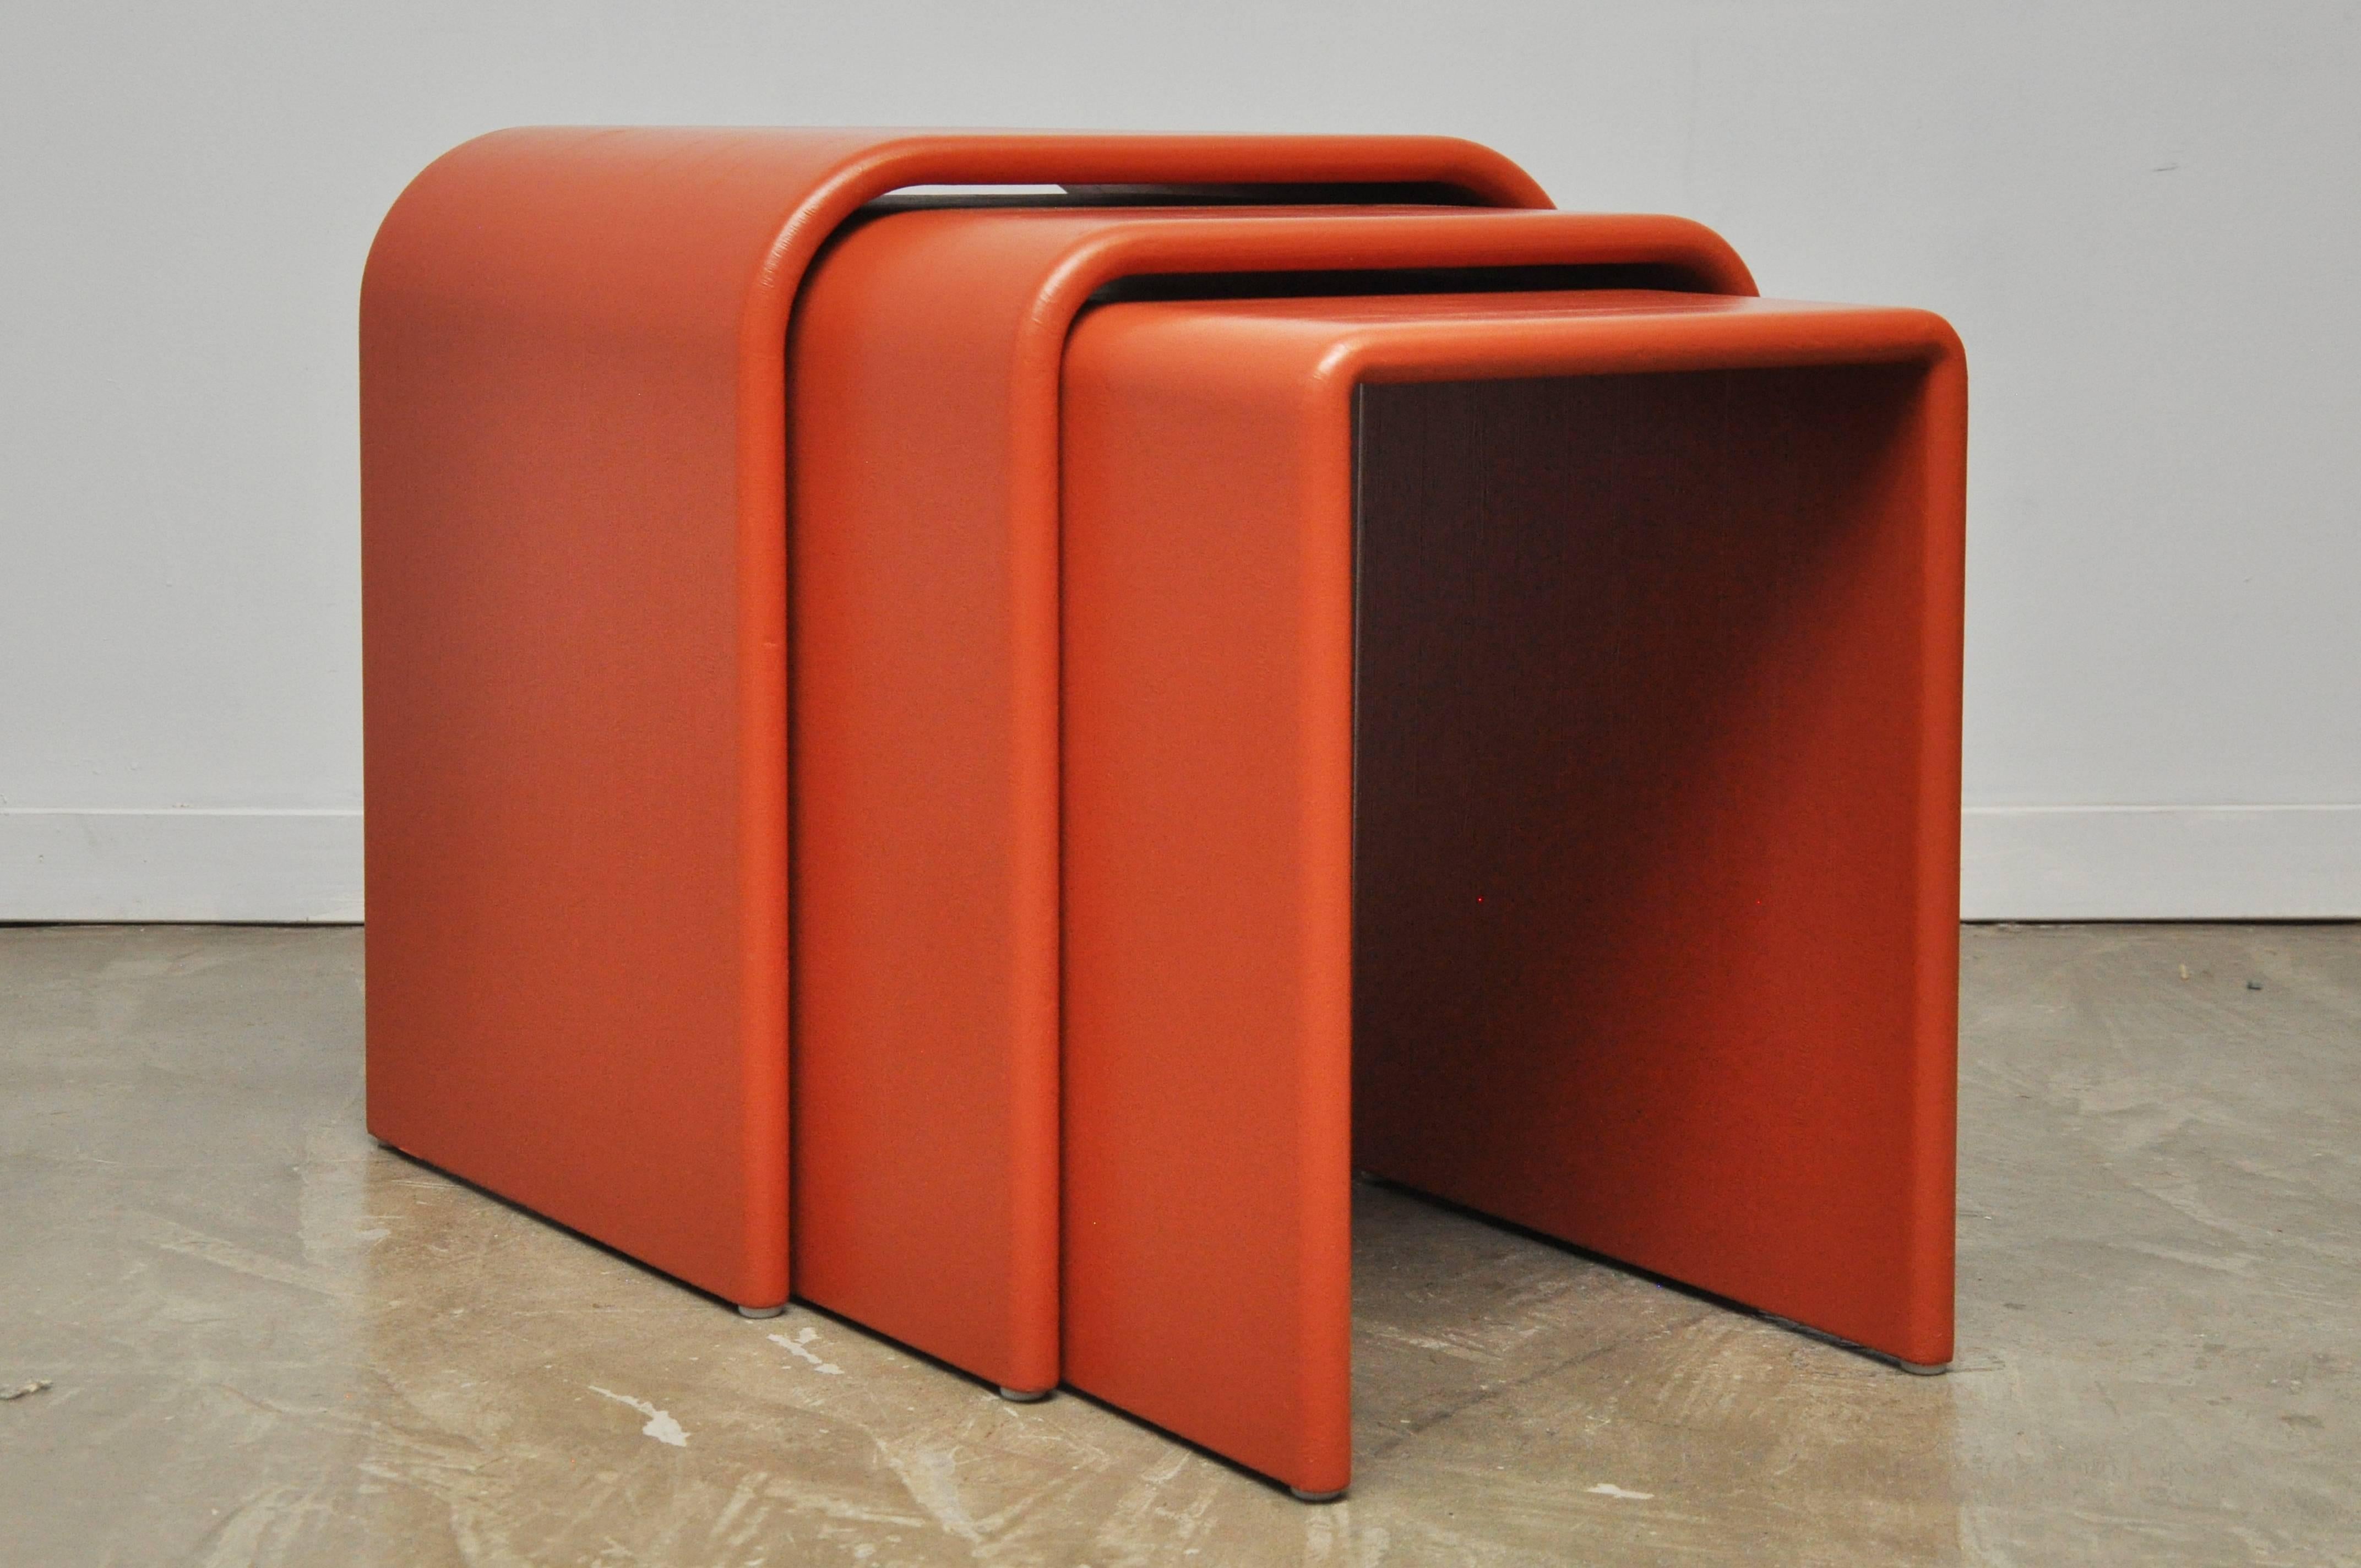 Set of three Eel Skin nesting tables. Waterfall form tables wrapped in coral dyed eel skin, circa 1970s.